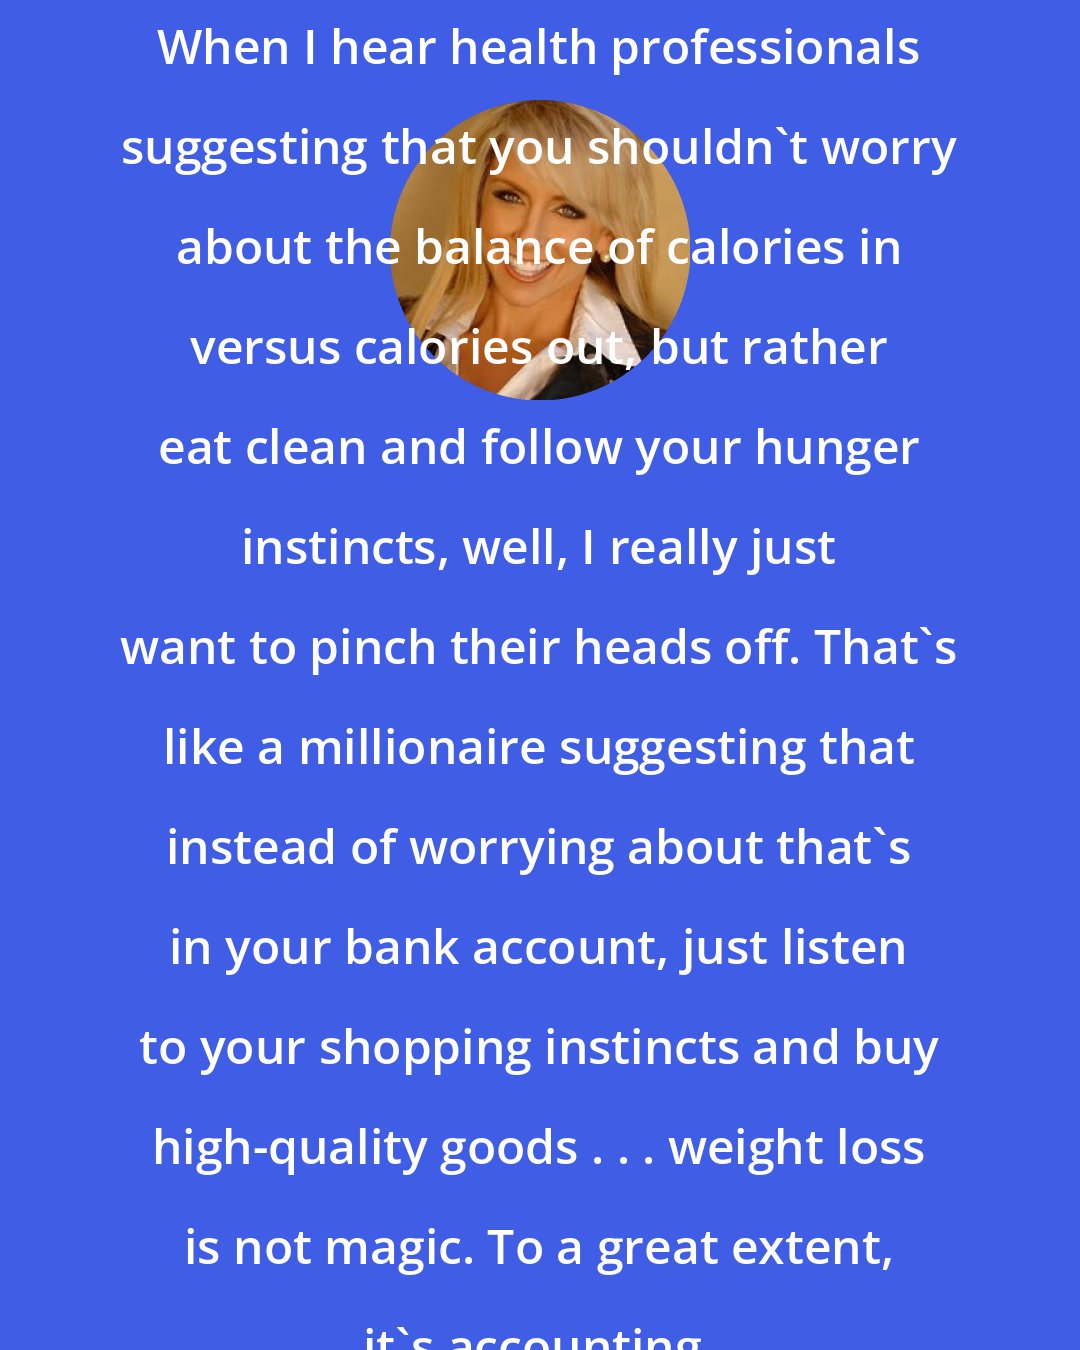 Chalene Johnson: When I hear health professionals suggesting that you shouldn't worry about the balance of calories in versus calories out, but rather eat clean and follow your hunger instincts, well, I really just want to pinch their heads off. That's like a millionaire suggesting that instead of worrying about that's in your bank account, just listen to your shopping instincts and buy high-quality goods . . . weight loss is not magic. To a great extent, it's accounting.